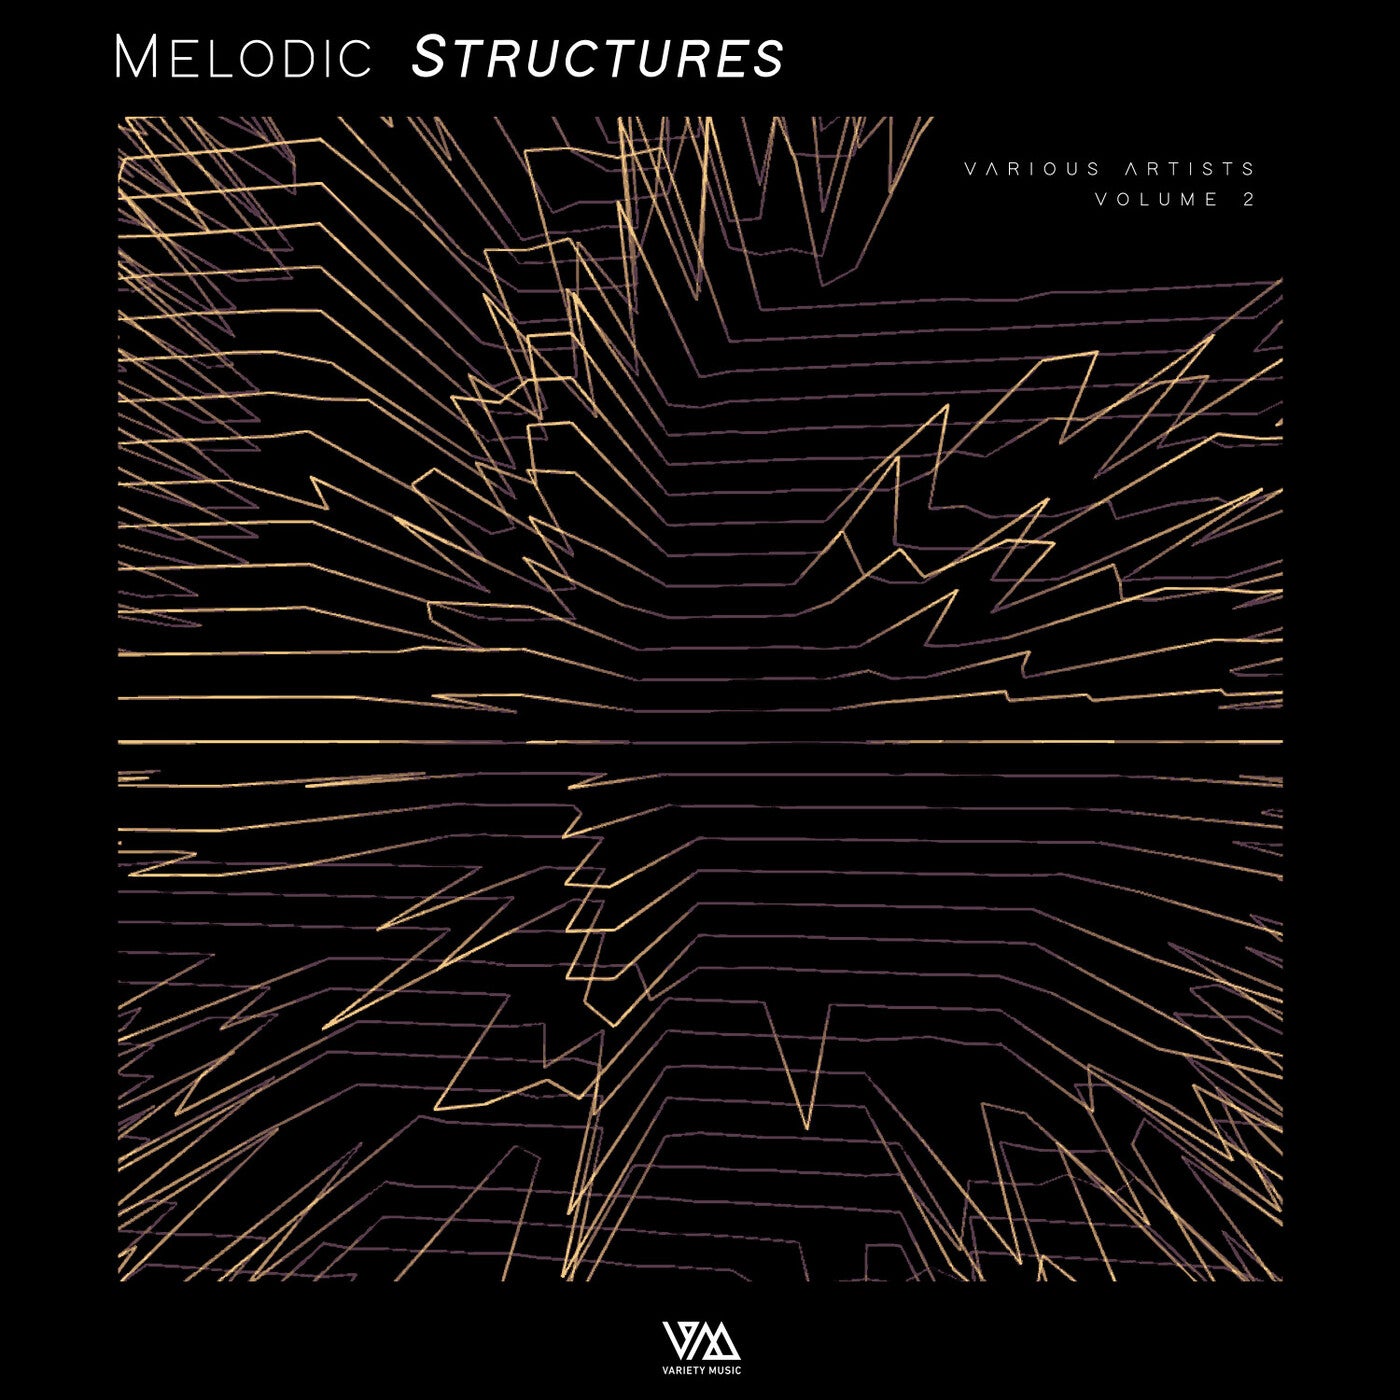 Melodic Structures Vol. 2